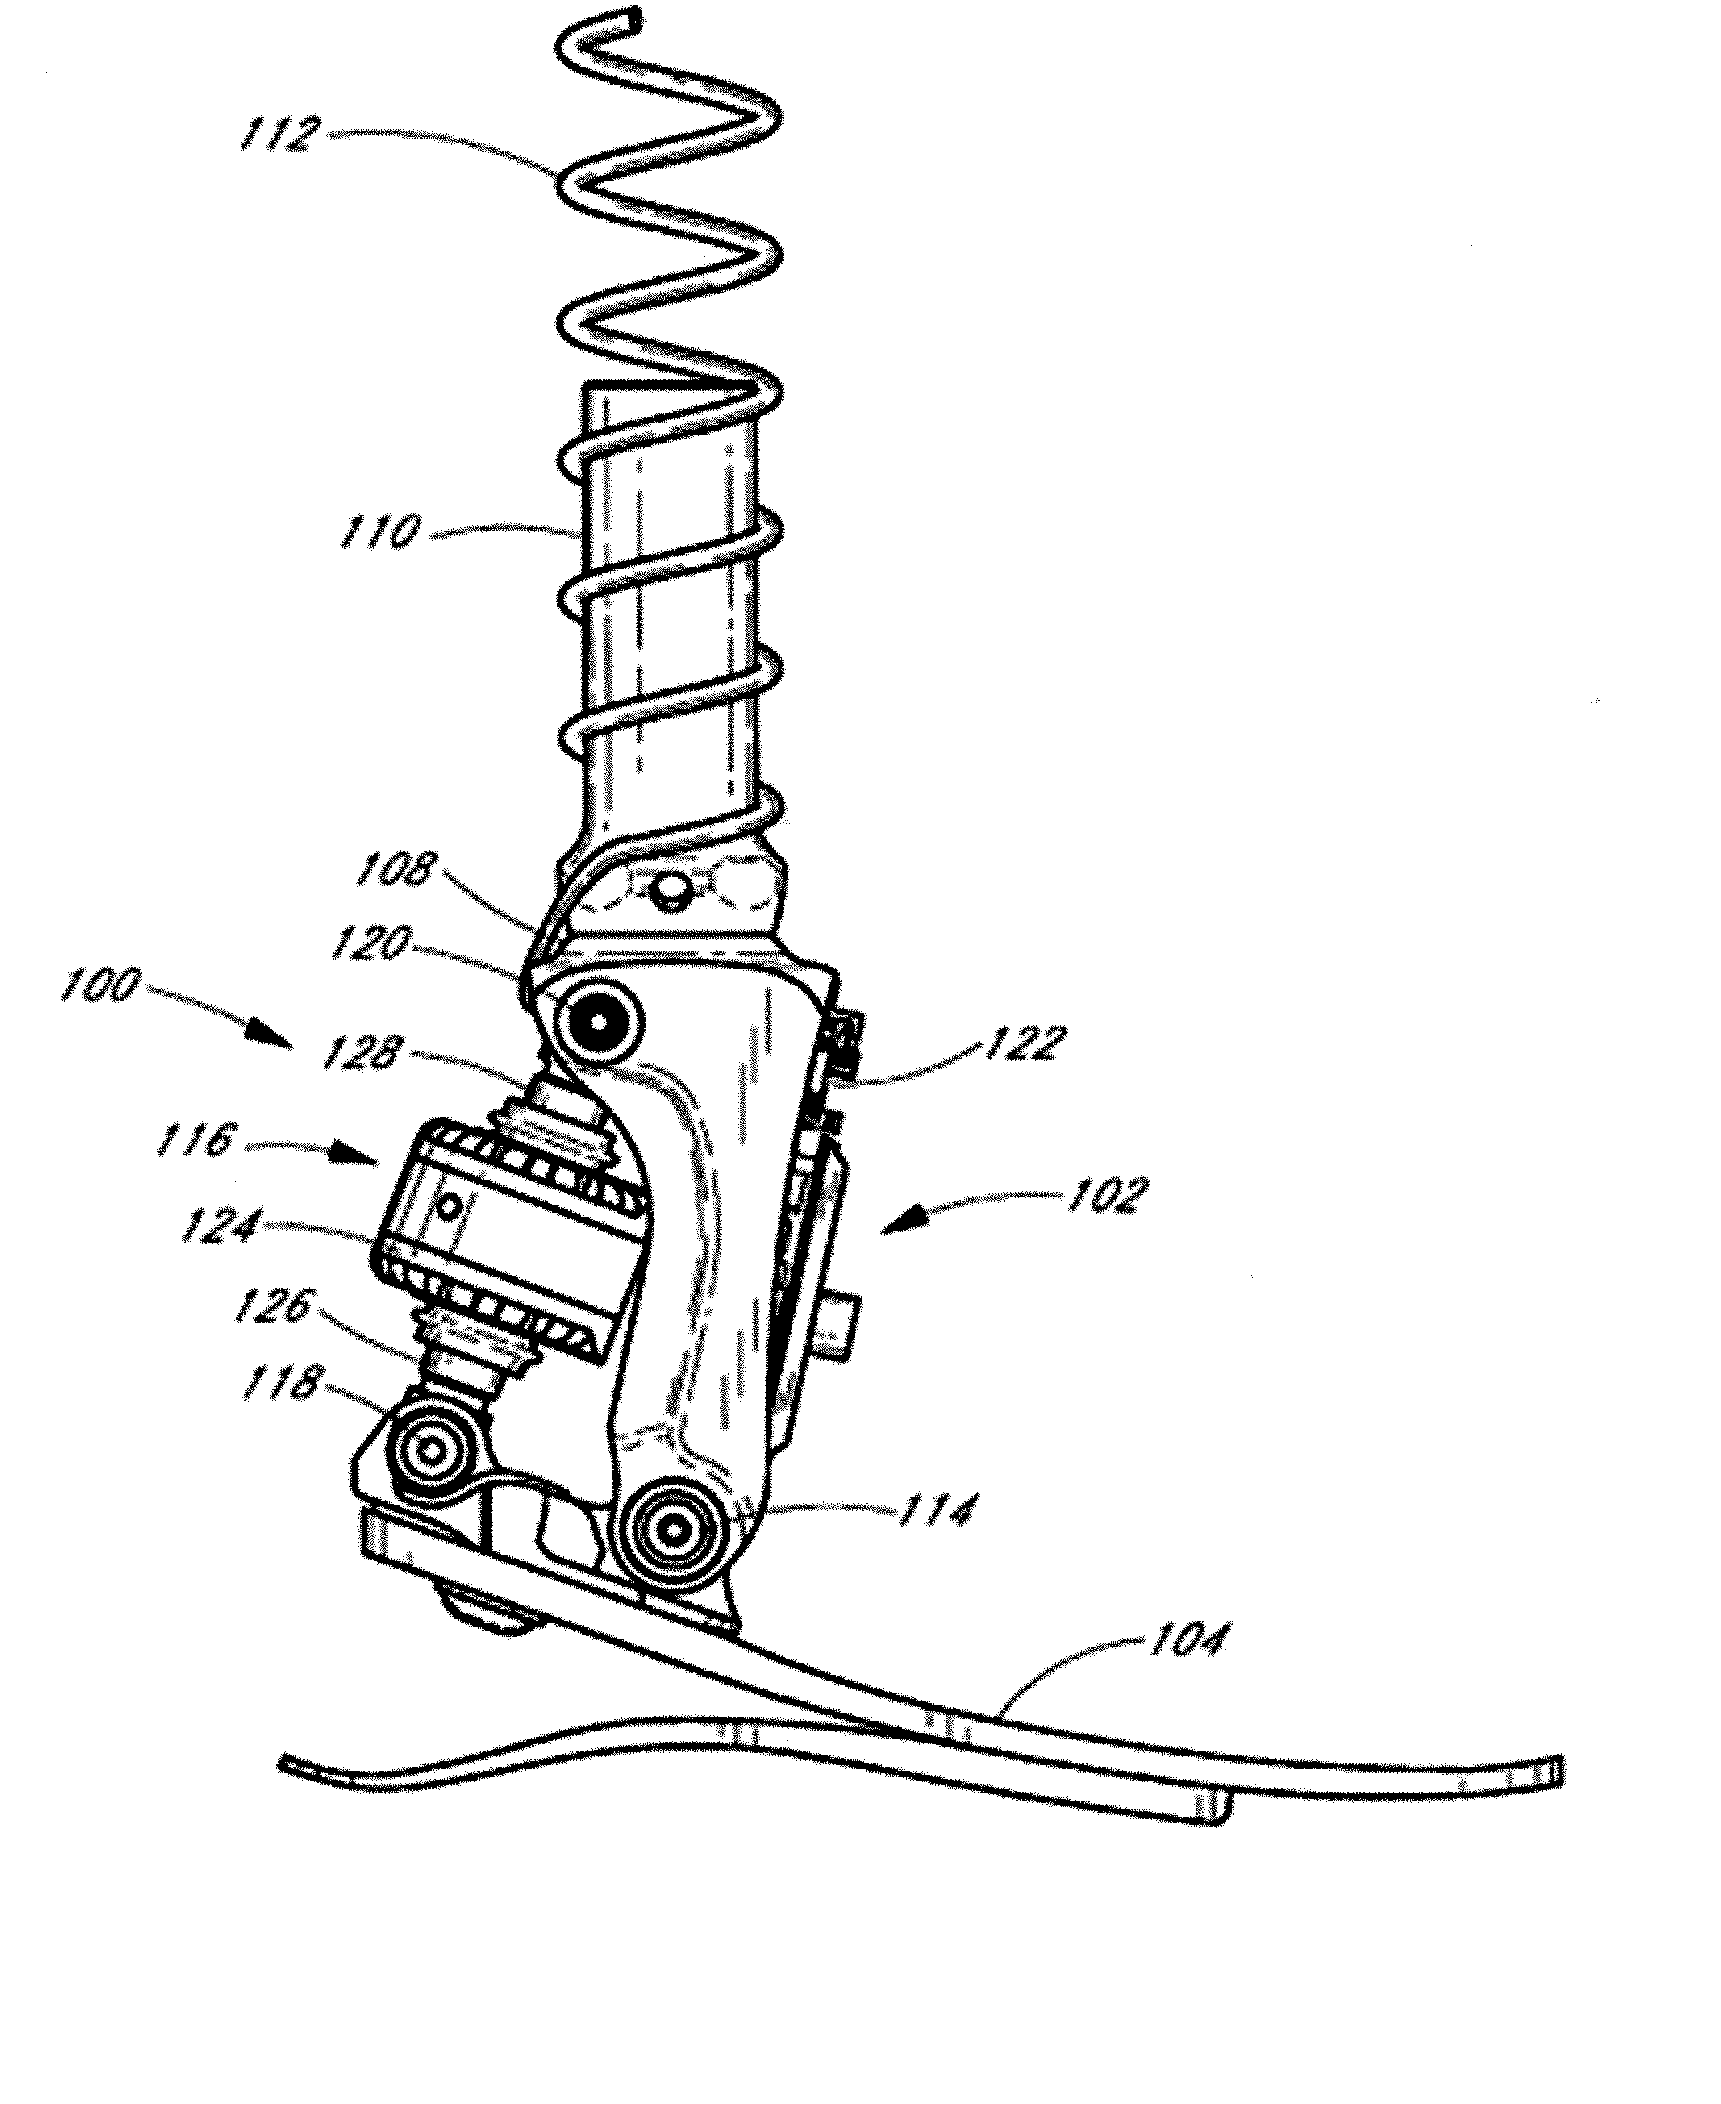 Actuator assebmly for prosthetic or orthotic joint